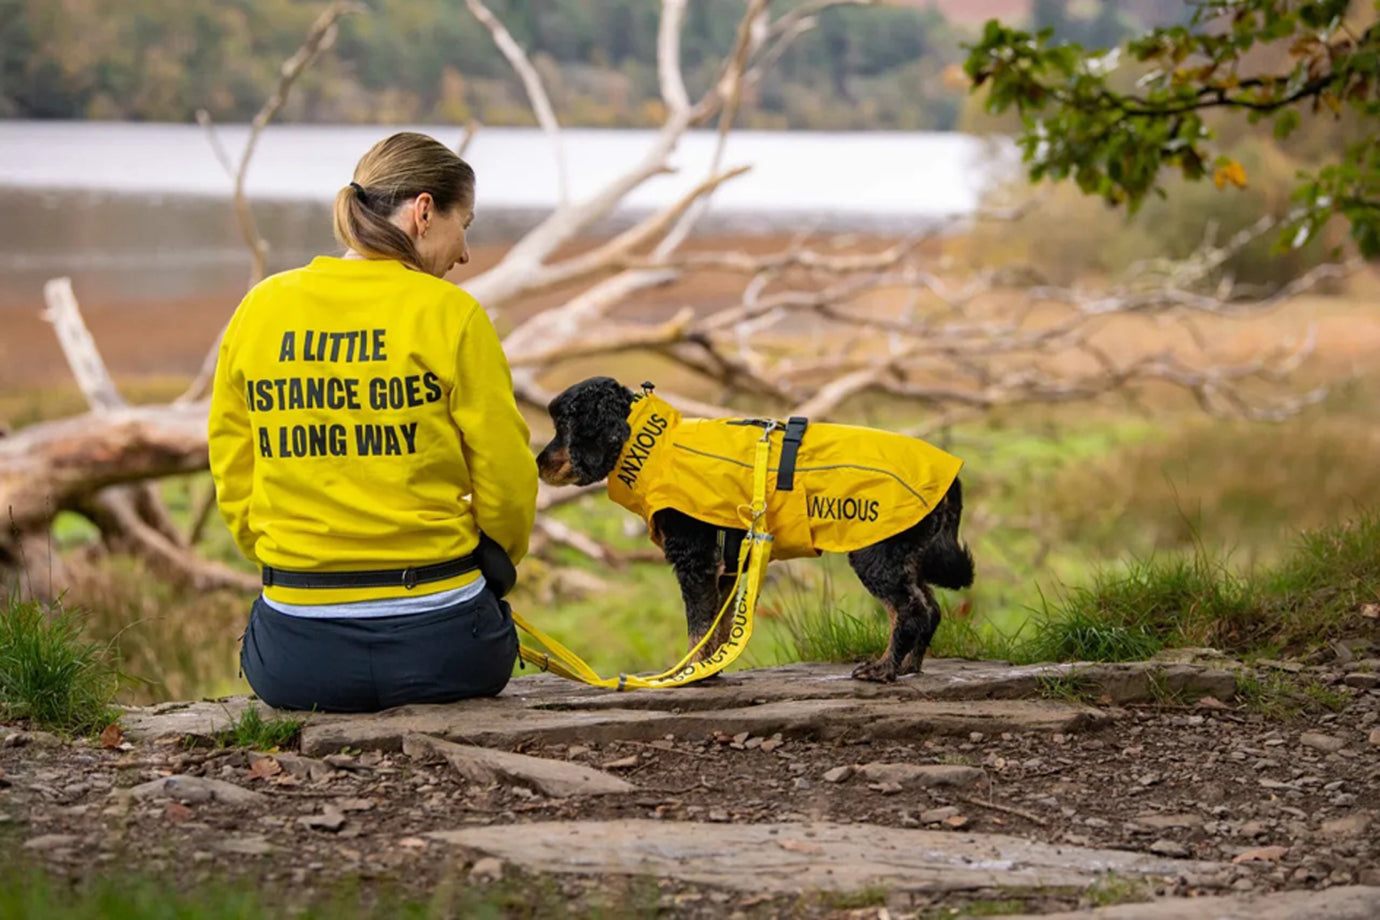 Yellow leads the way: A colourful revolution in canine confidence